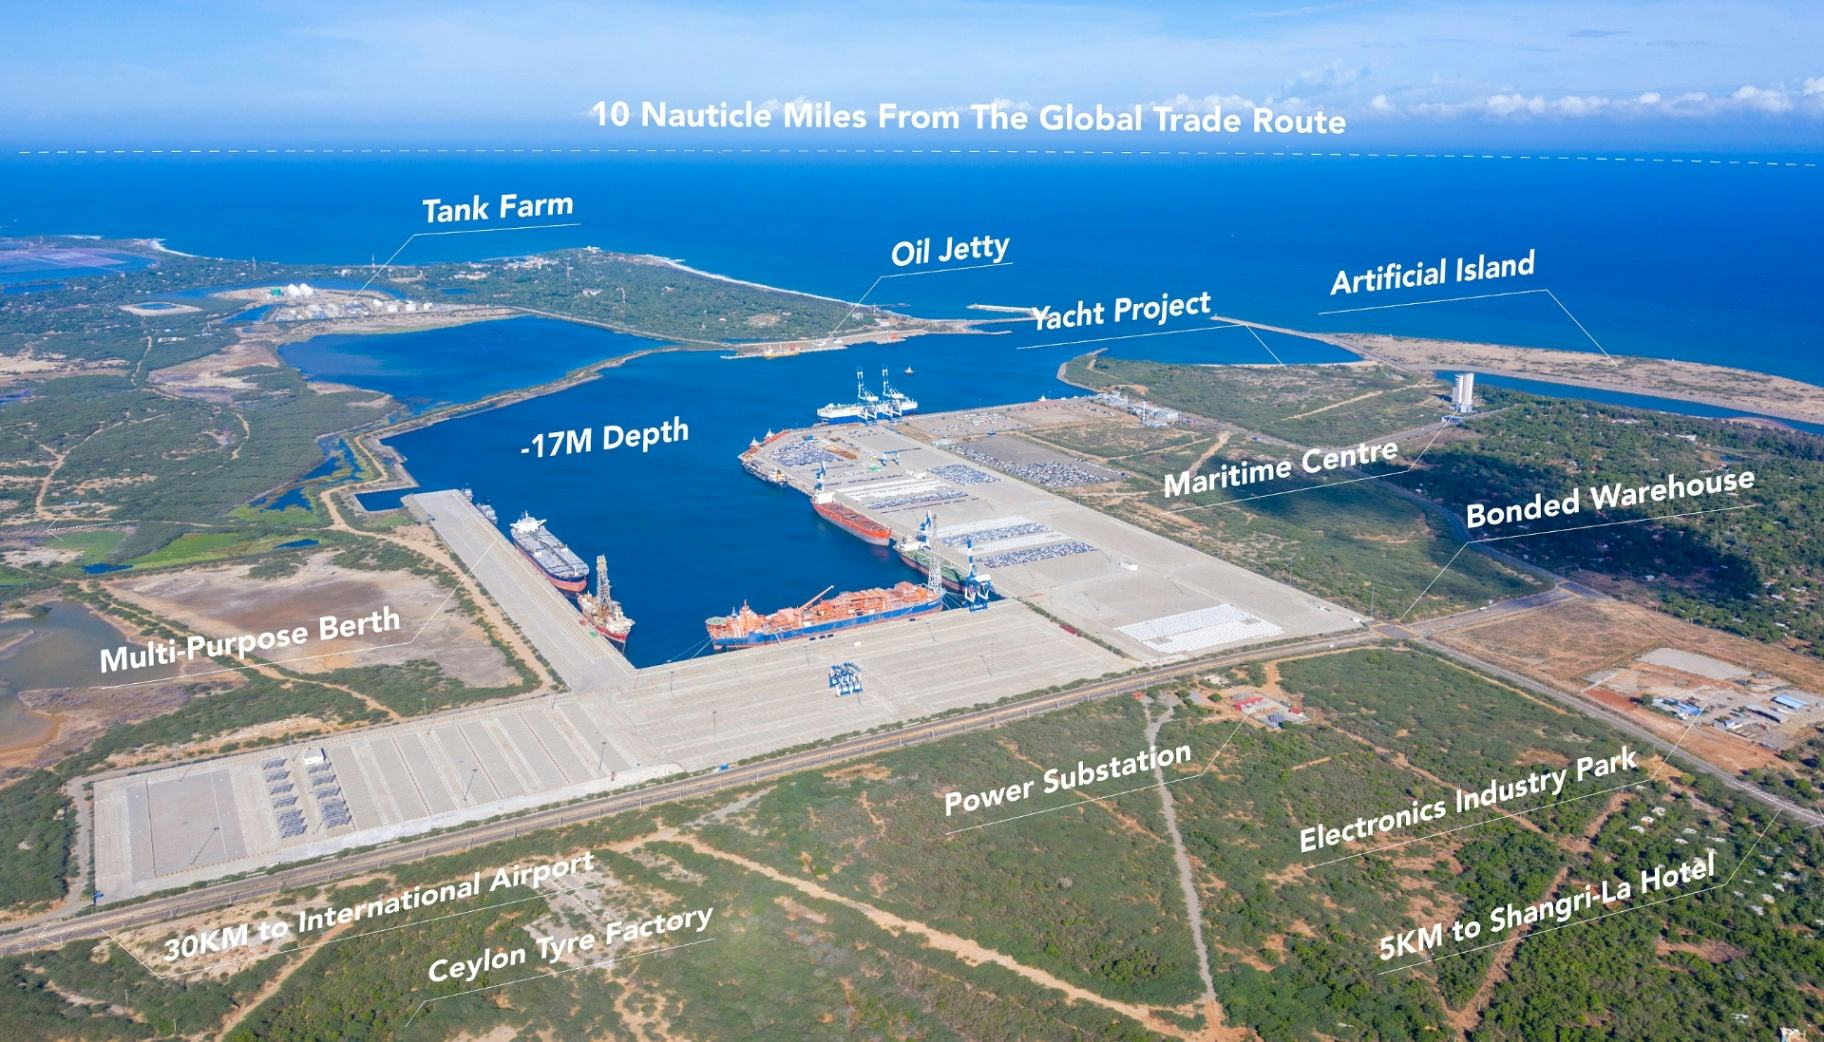 H’tota Port Industrial Park to expand following CEA approval 